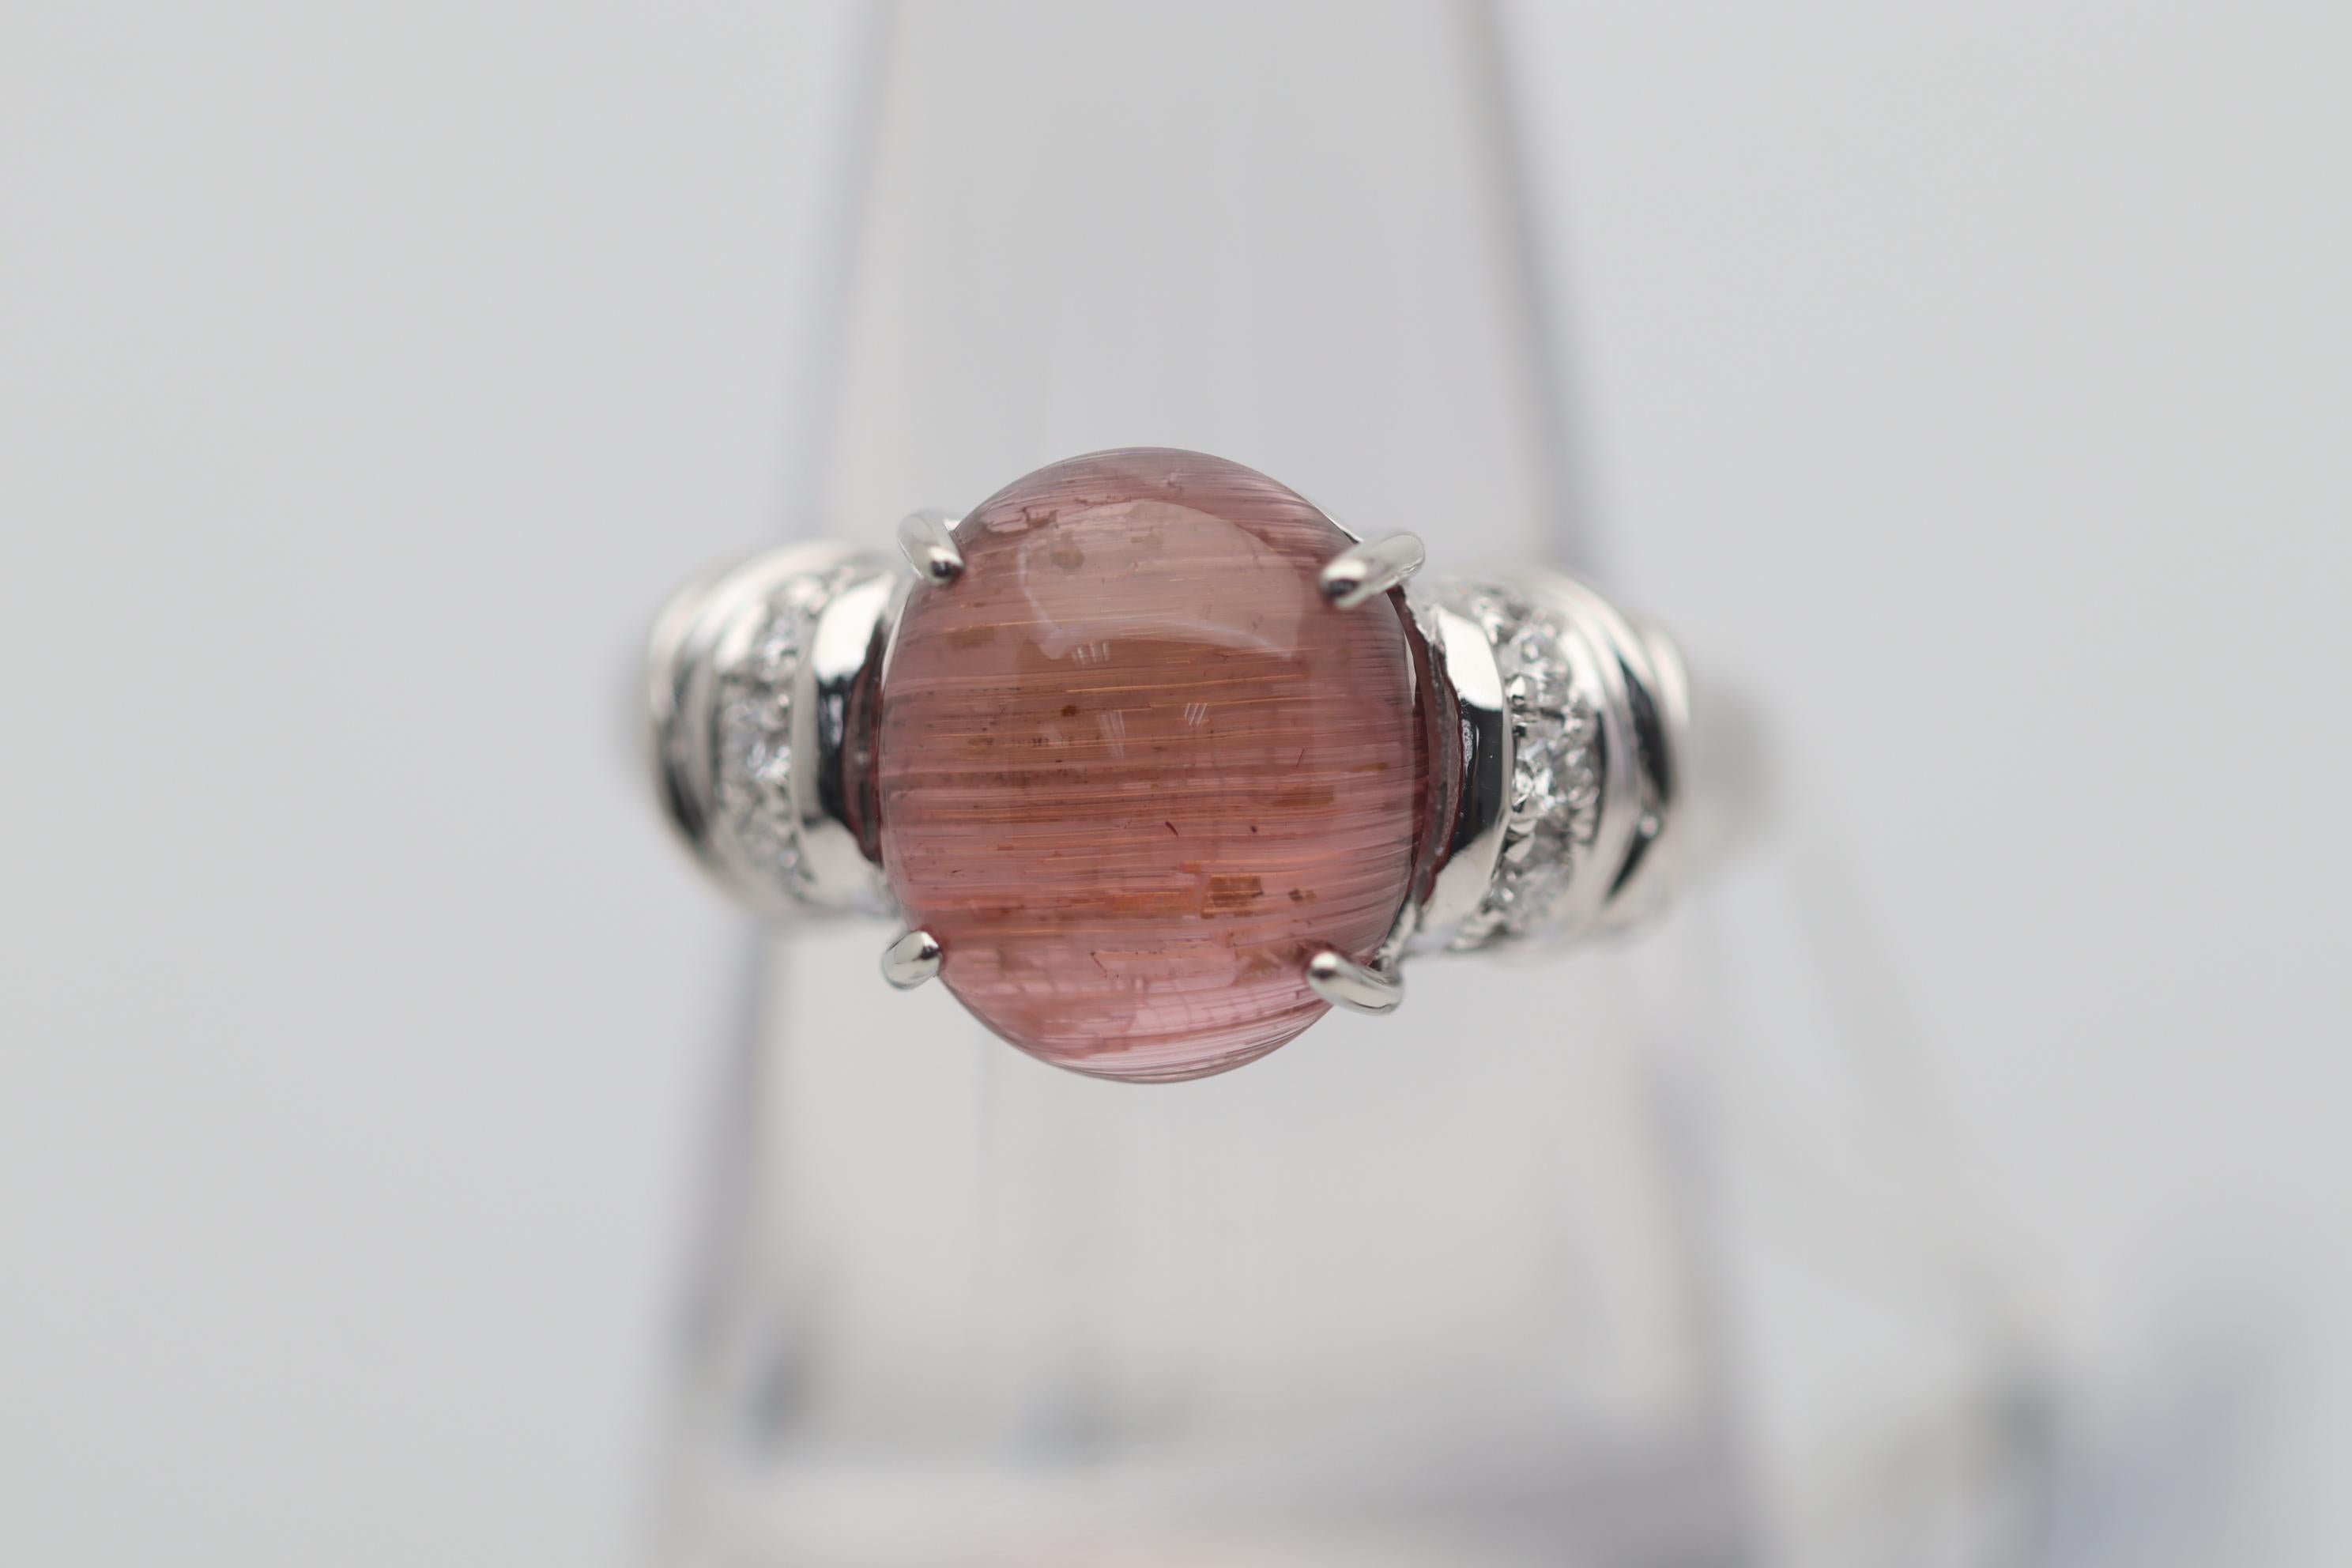 A stylish platinum made ring featuring a cabochon tourmaline with a unique phenomenon, chatoyancy! A strong and sharp cats eye can be seen running across the dome of this 4.68 carat tourmaline. It is further accented by 0.20 carats of round